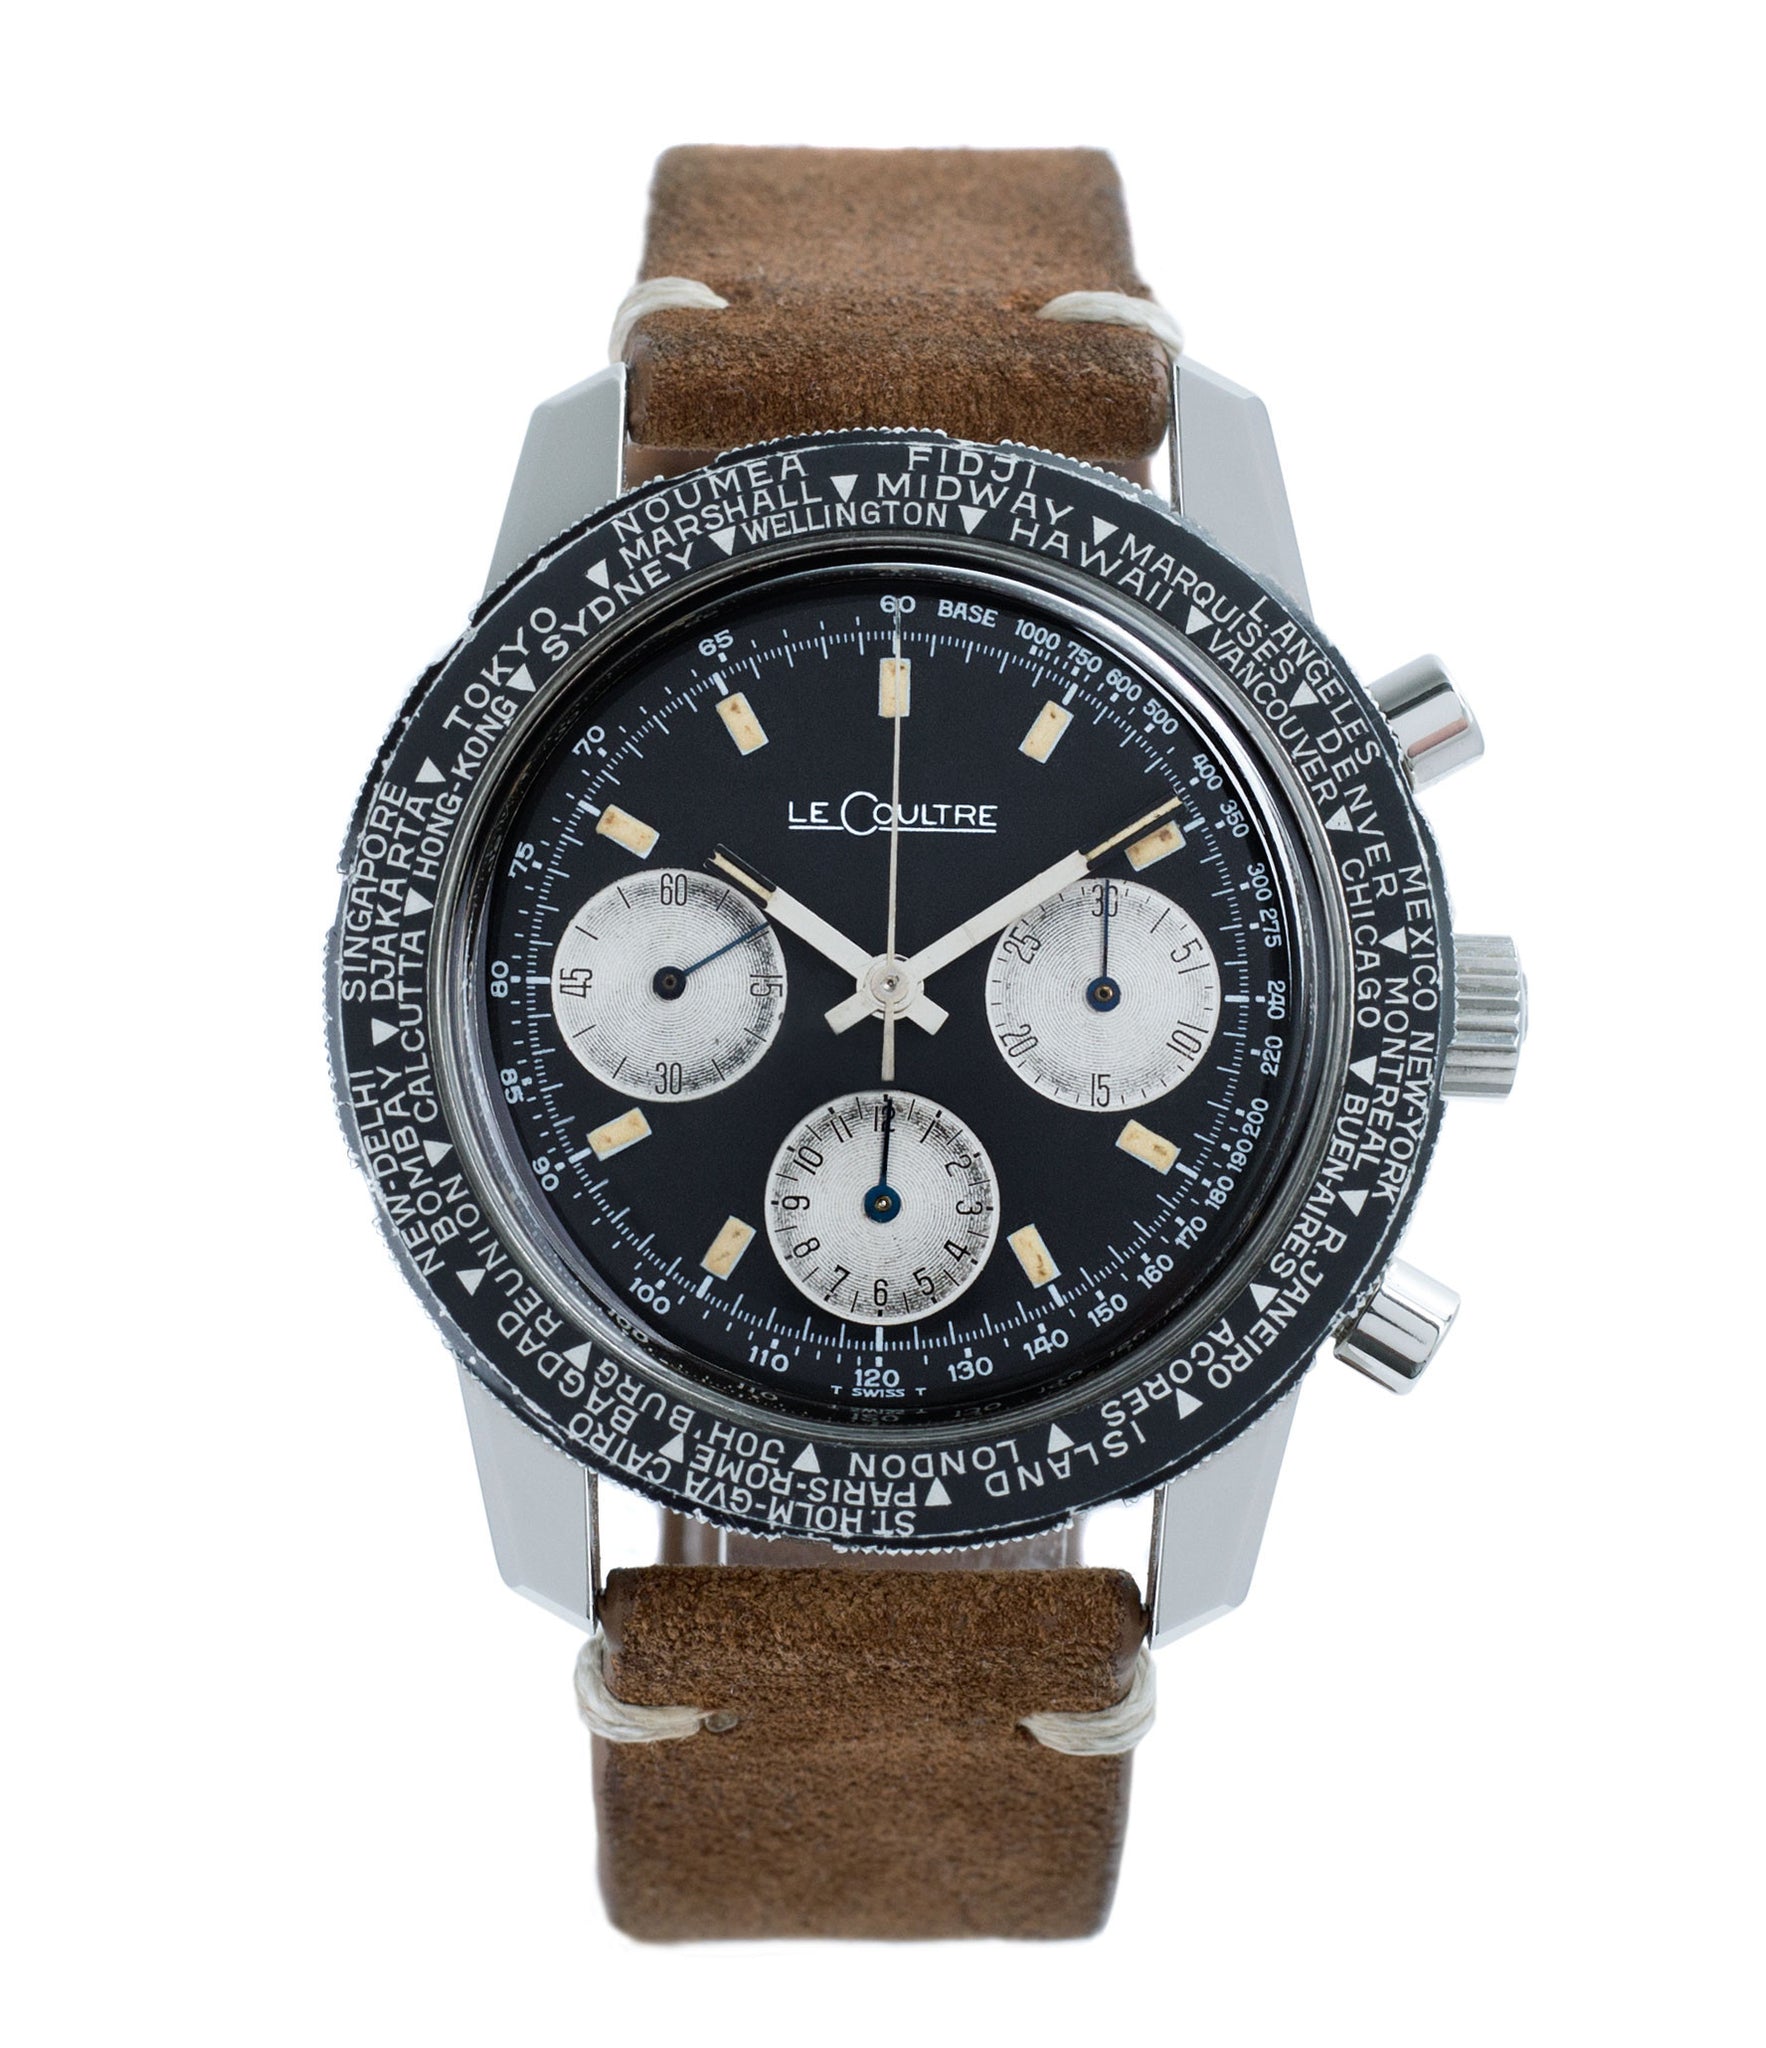 buy LeCoultre Deep Sea Shark E2643 steel vintage chronograph online at A Collected Man London vintage watch specialist